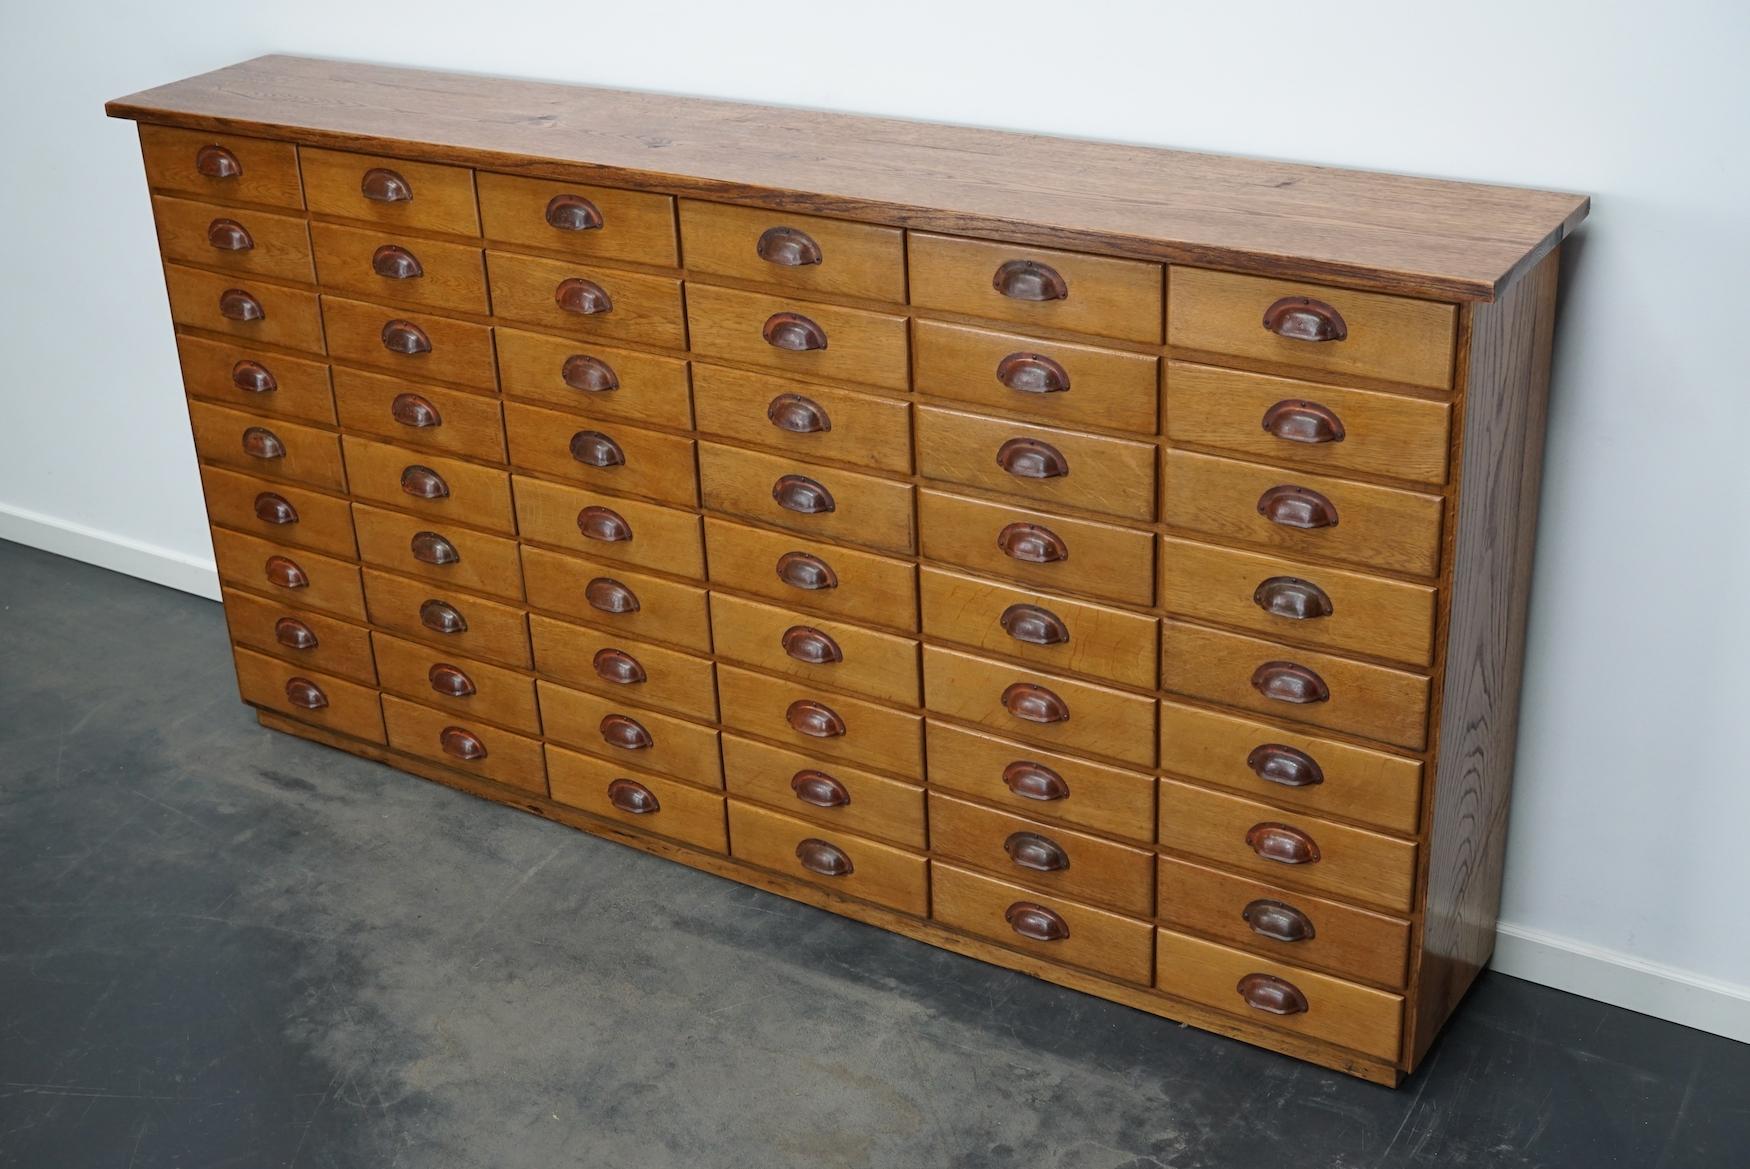 This apothecary cabinet was made from oak circa 1940 / 1950s in Germany. It features 54 drawers with nice metal handles. The interior dimensions of the drawers are: DWH 26 x 28 x 7 cm. We have a pair of these cabinets available.